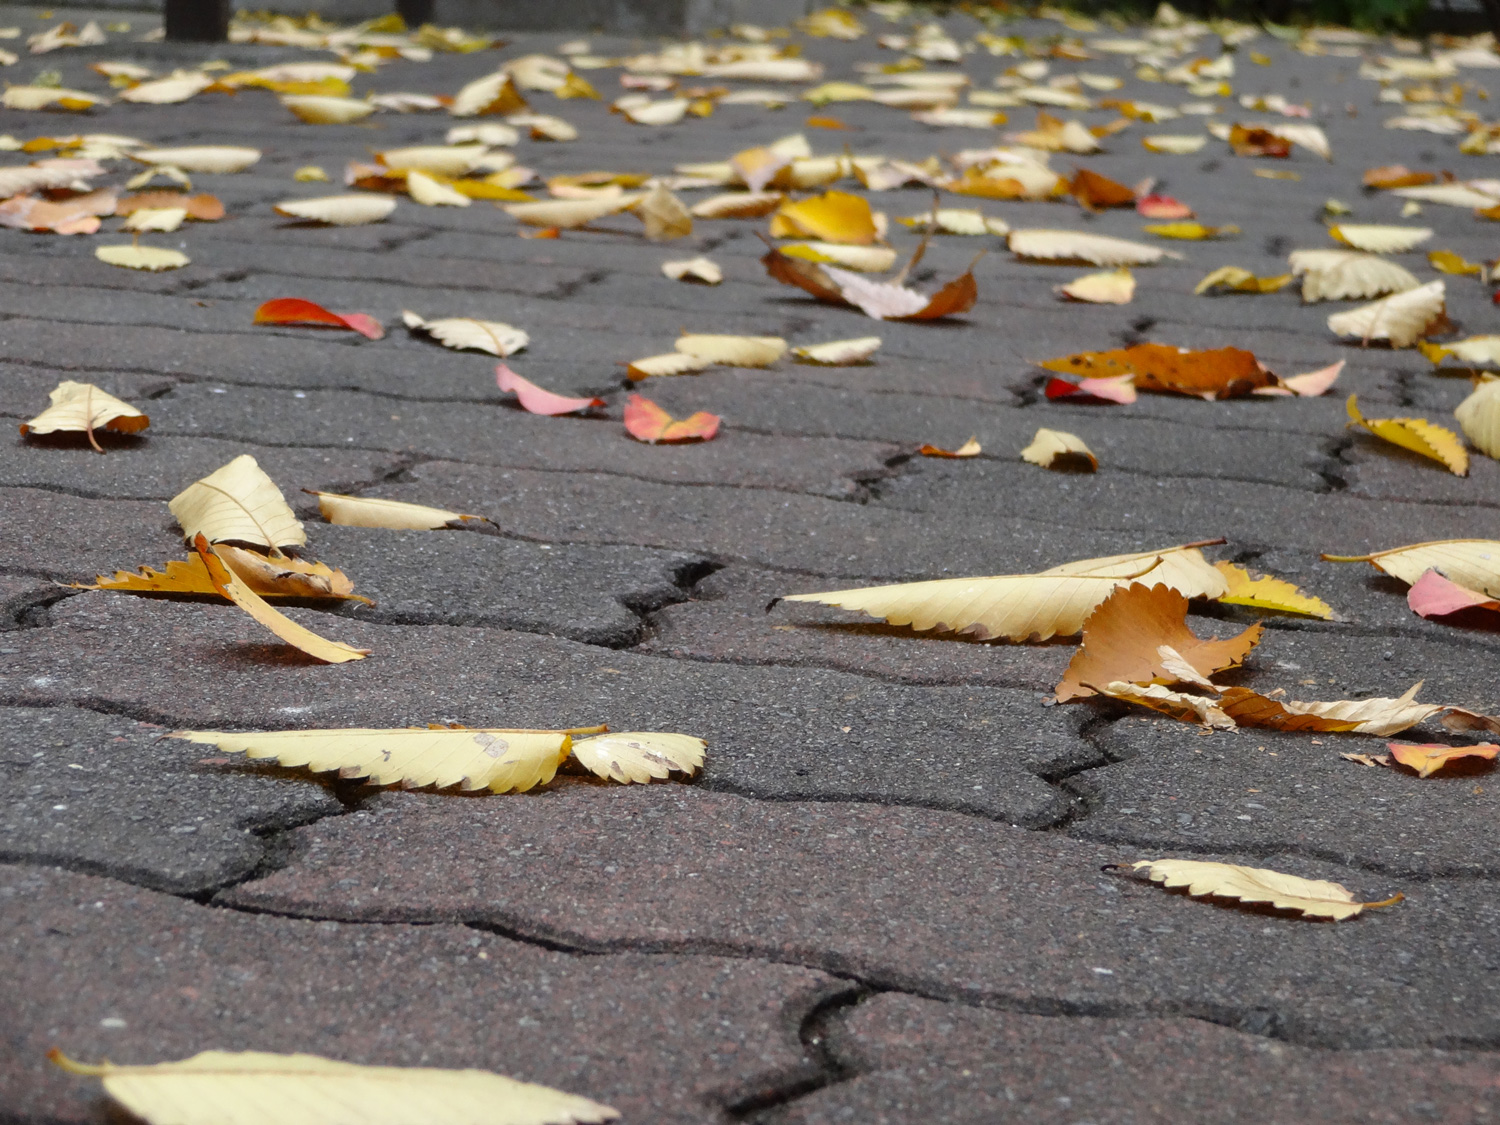 Colorful Fallen Leaves on the Interlocking Concrete Pavers